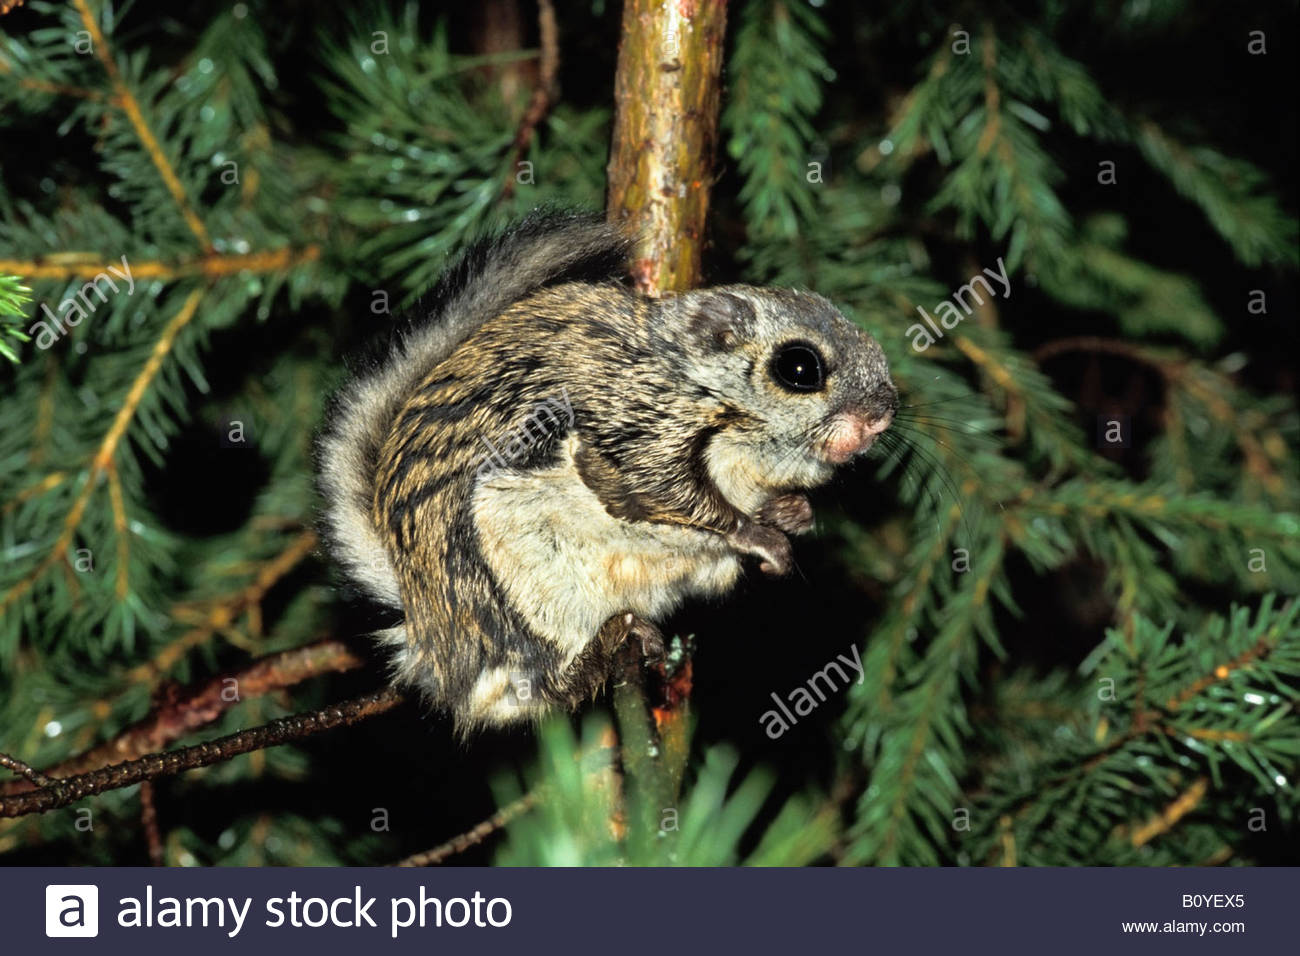 Siberian Flying Squirrel clipart #4, Download drawings